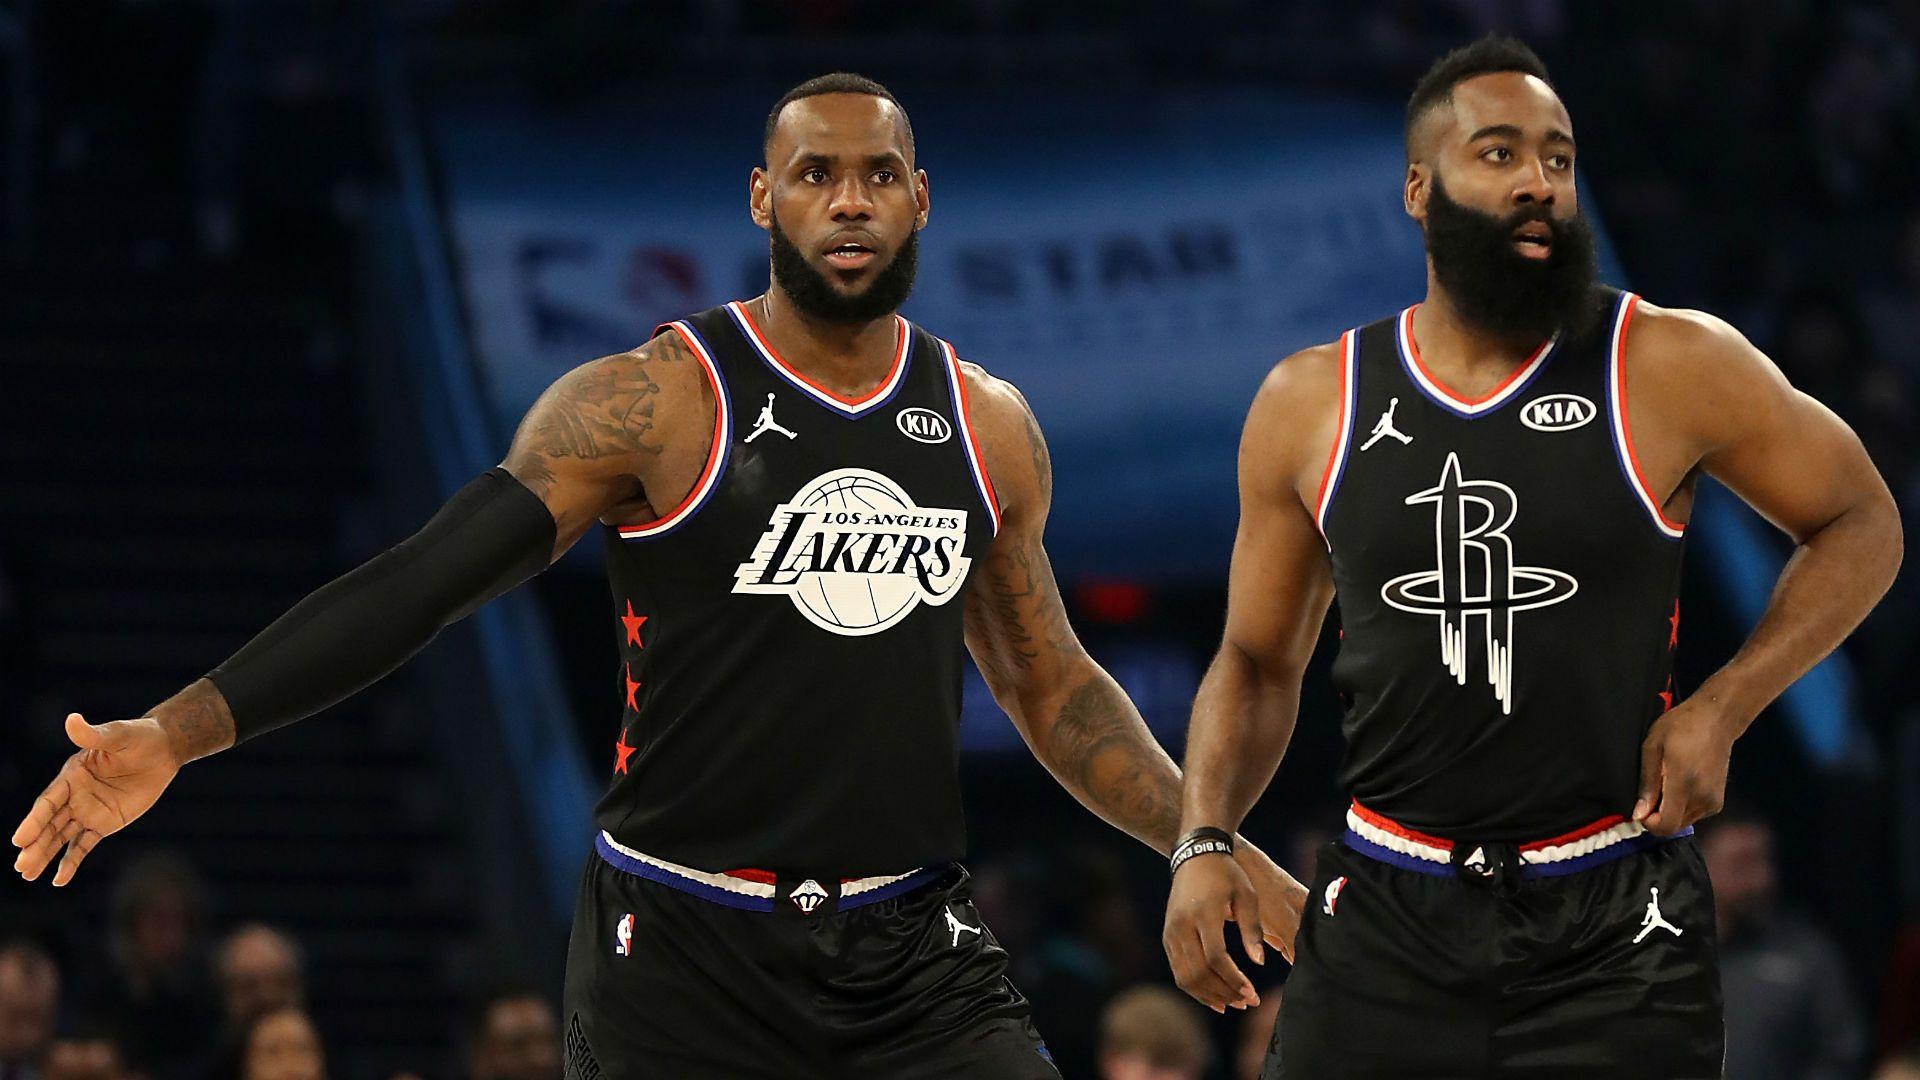 NBA All Star Voting Results 2020: Full List Of Starters